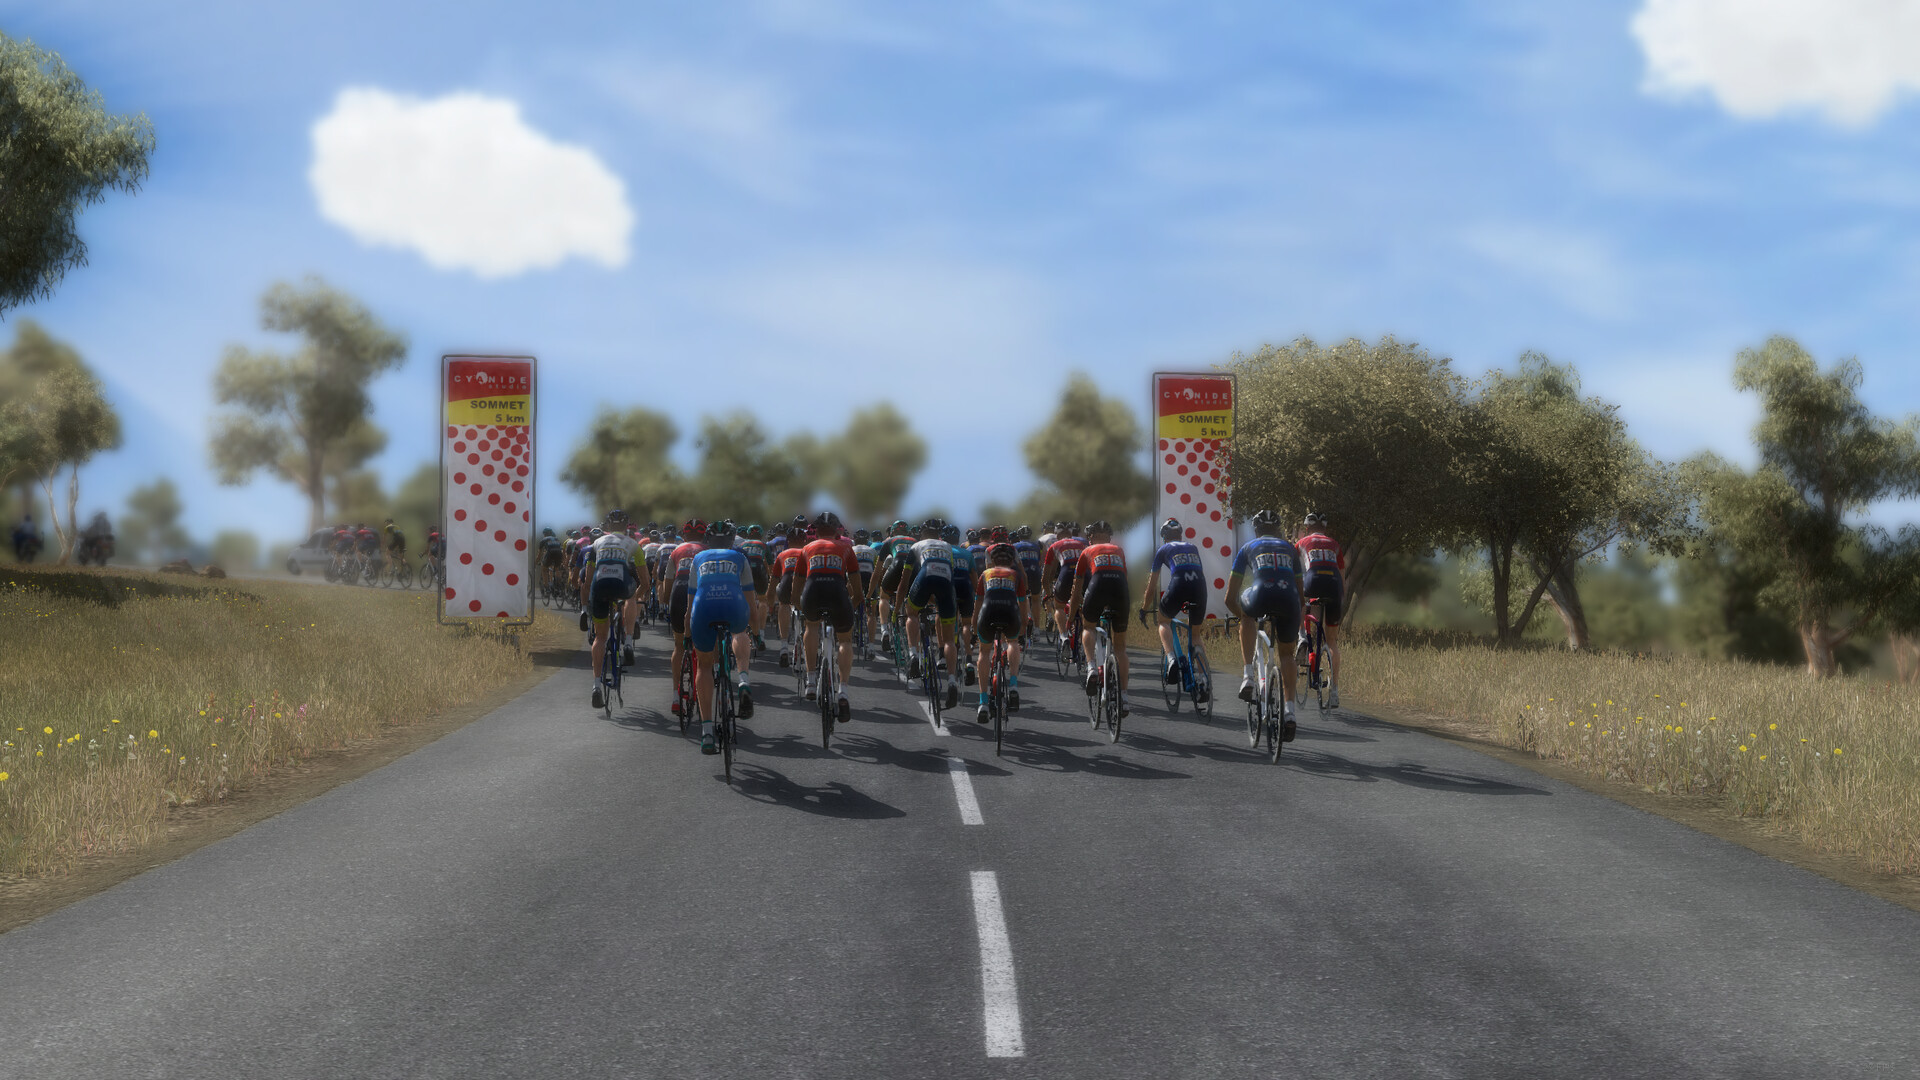 Pro Cycling Manager 2023 LATAM Steam CD Key